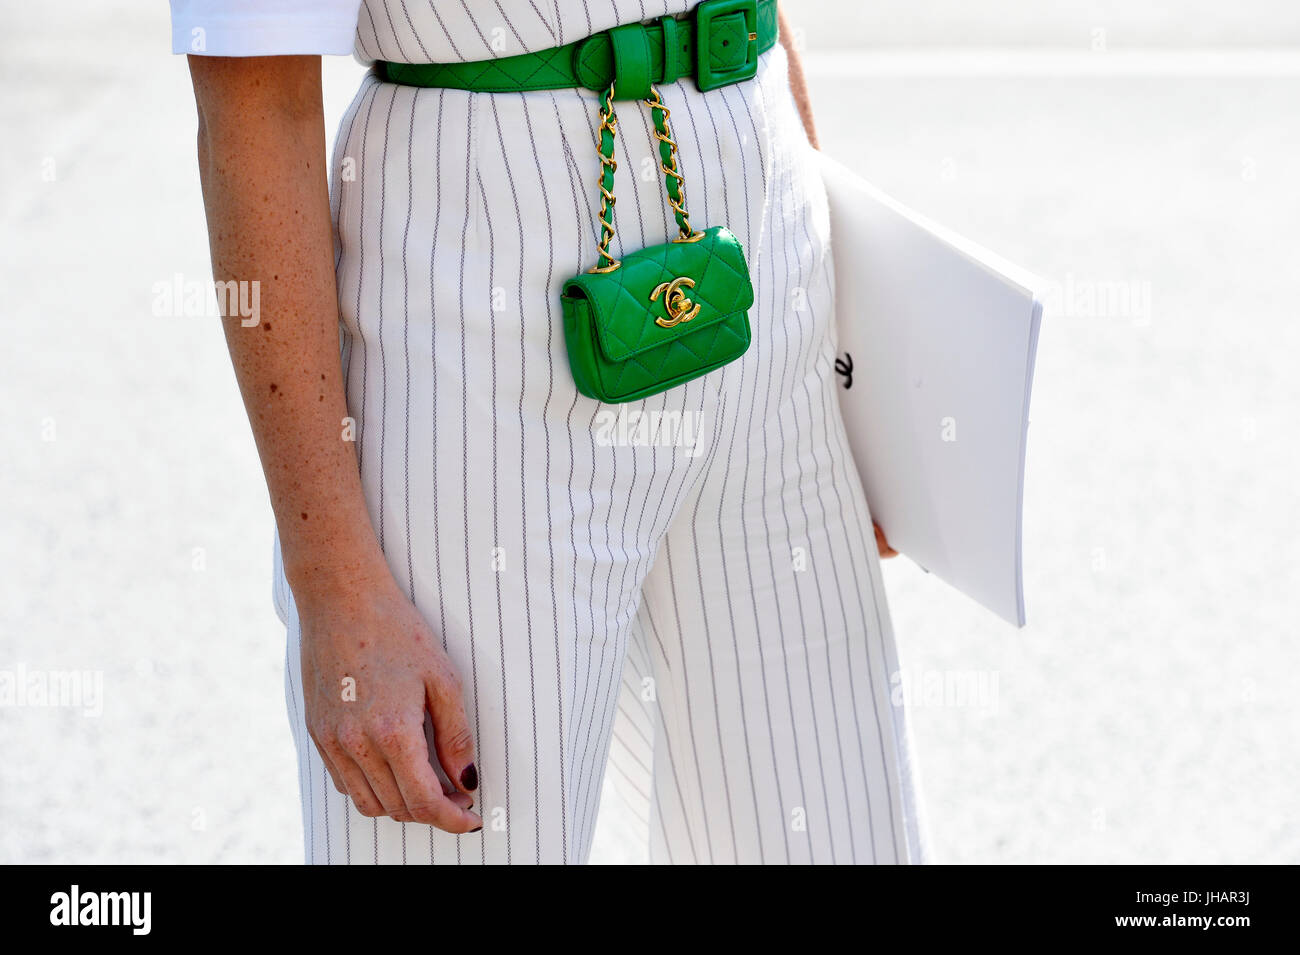 HOW THEY STYLE THE MICRO CHANEL BELT BAG - Time International